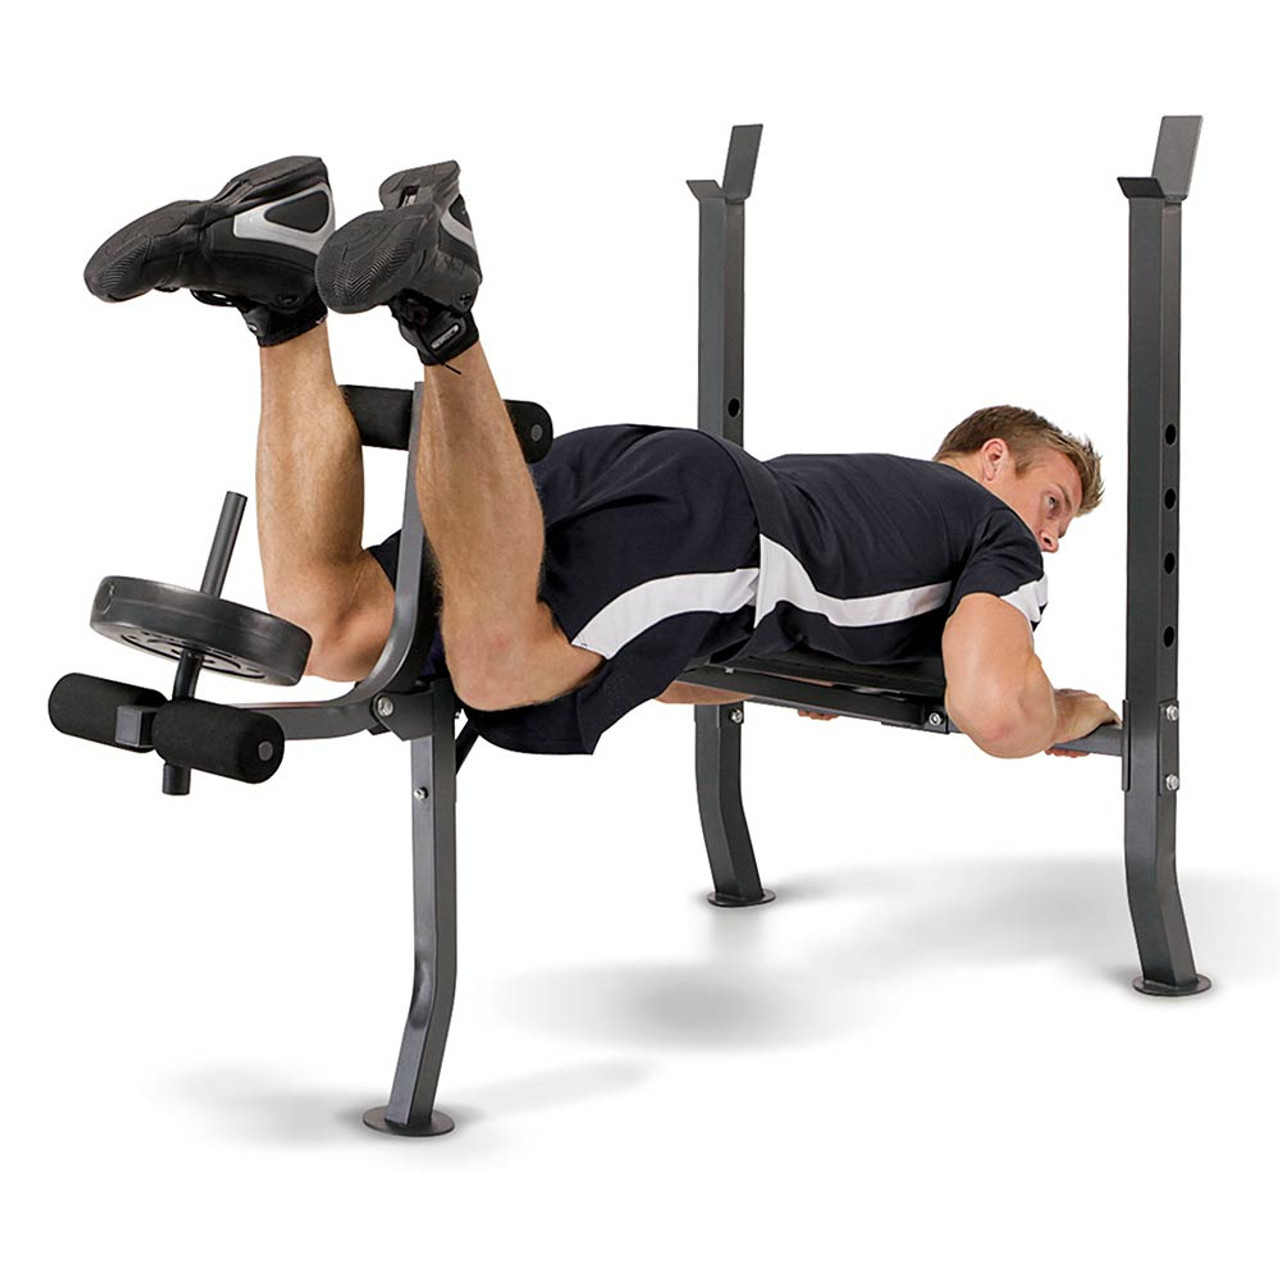 The Marcy Weight Bench 80lb Weight Set MD-2080 in use - leg curls